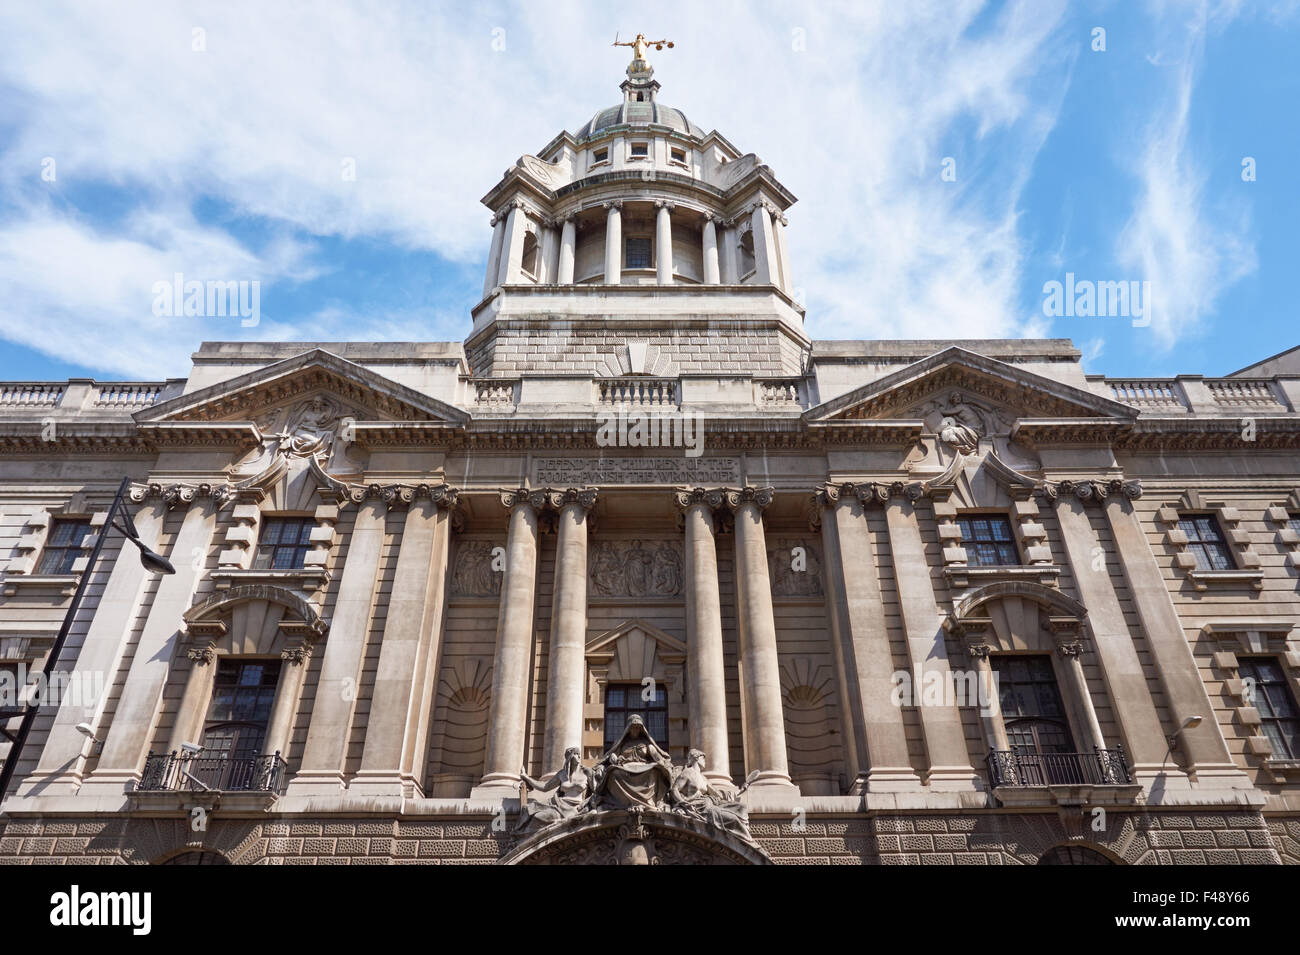 The Old Bailey Central Criminal Court Of England And Wales London